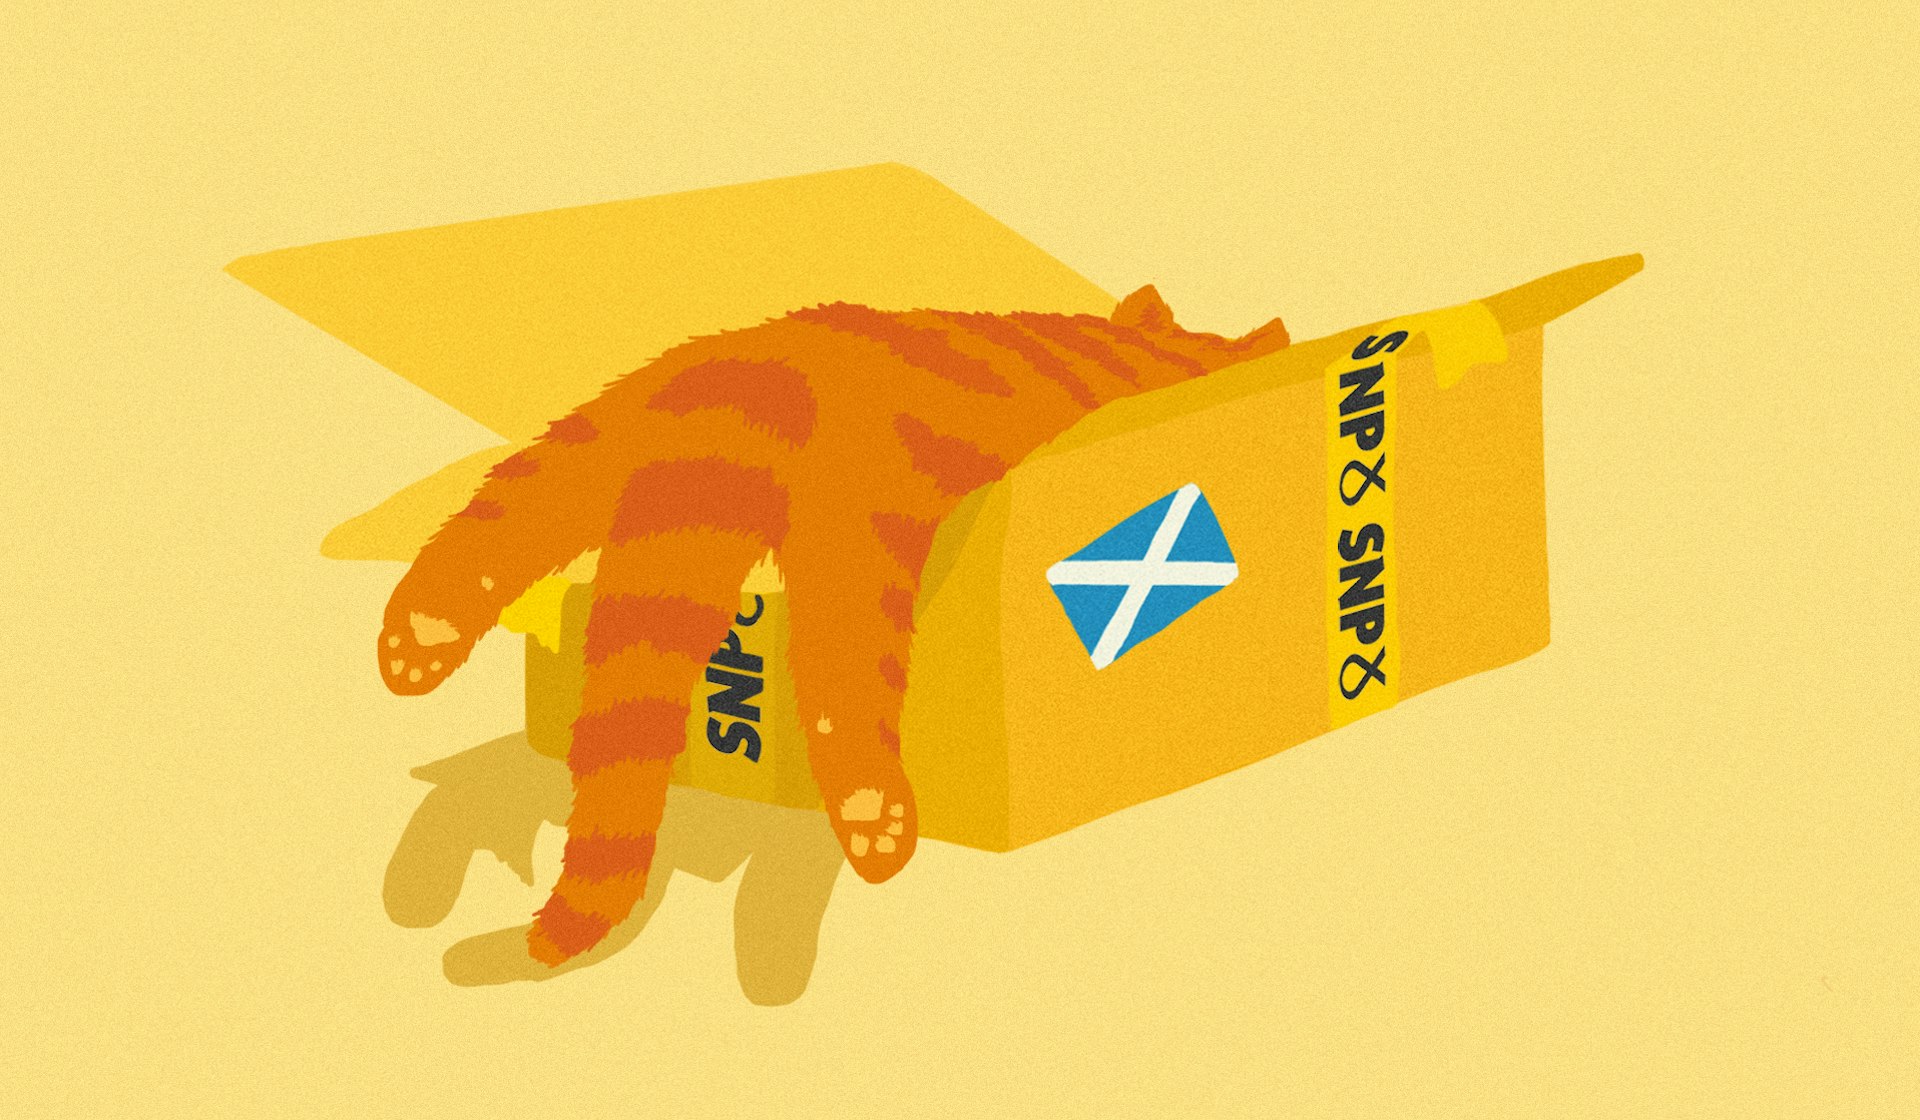 Scotland eyes independence: can nationalism deliver a progressive utopia?